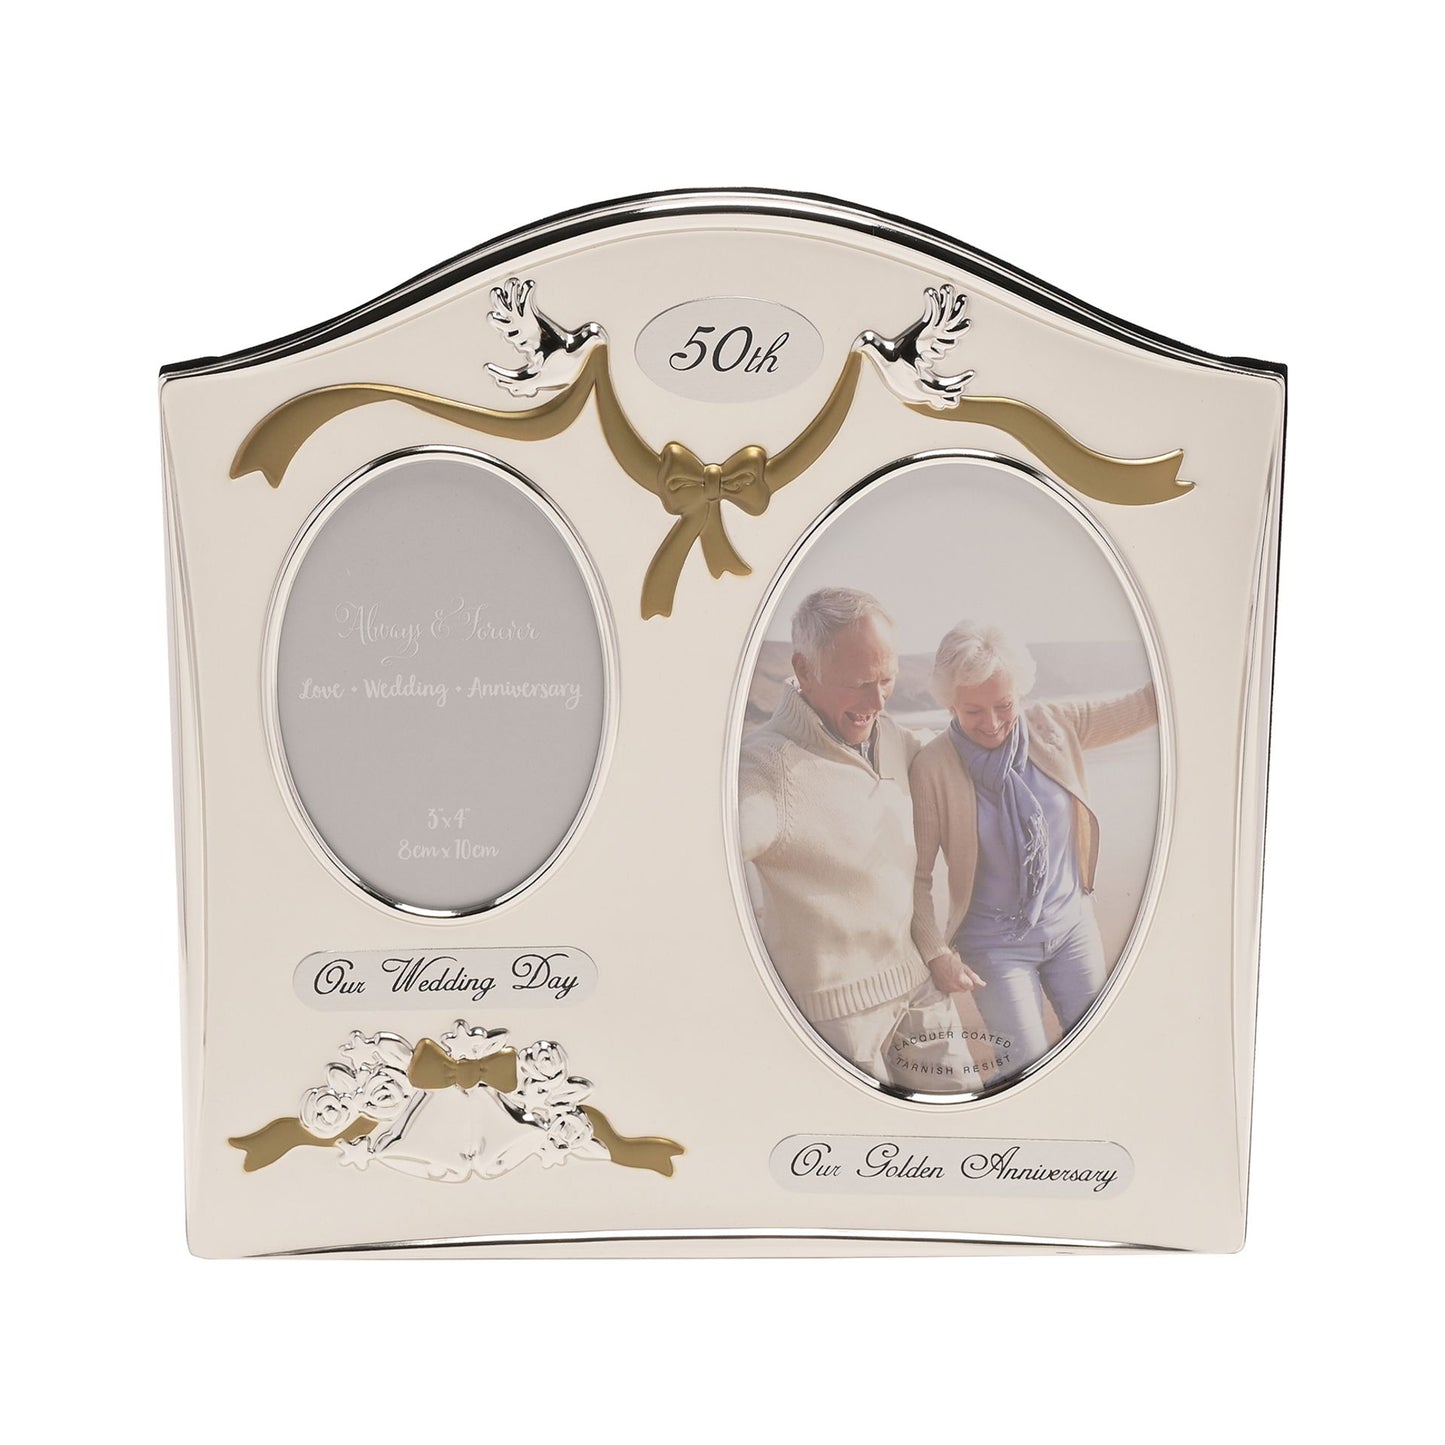 Juliana Two Tone Silver Plated Wedding Anniversary Photo Frame - 50th Golden Anniversary